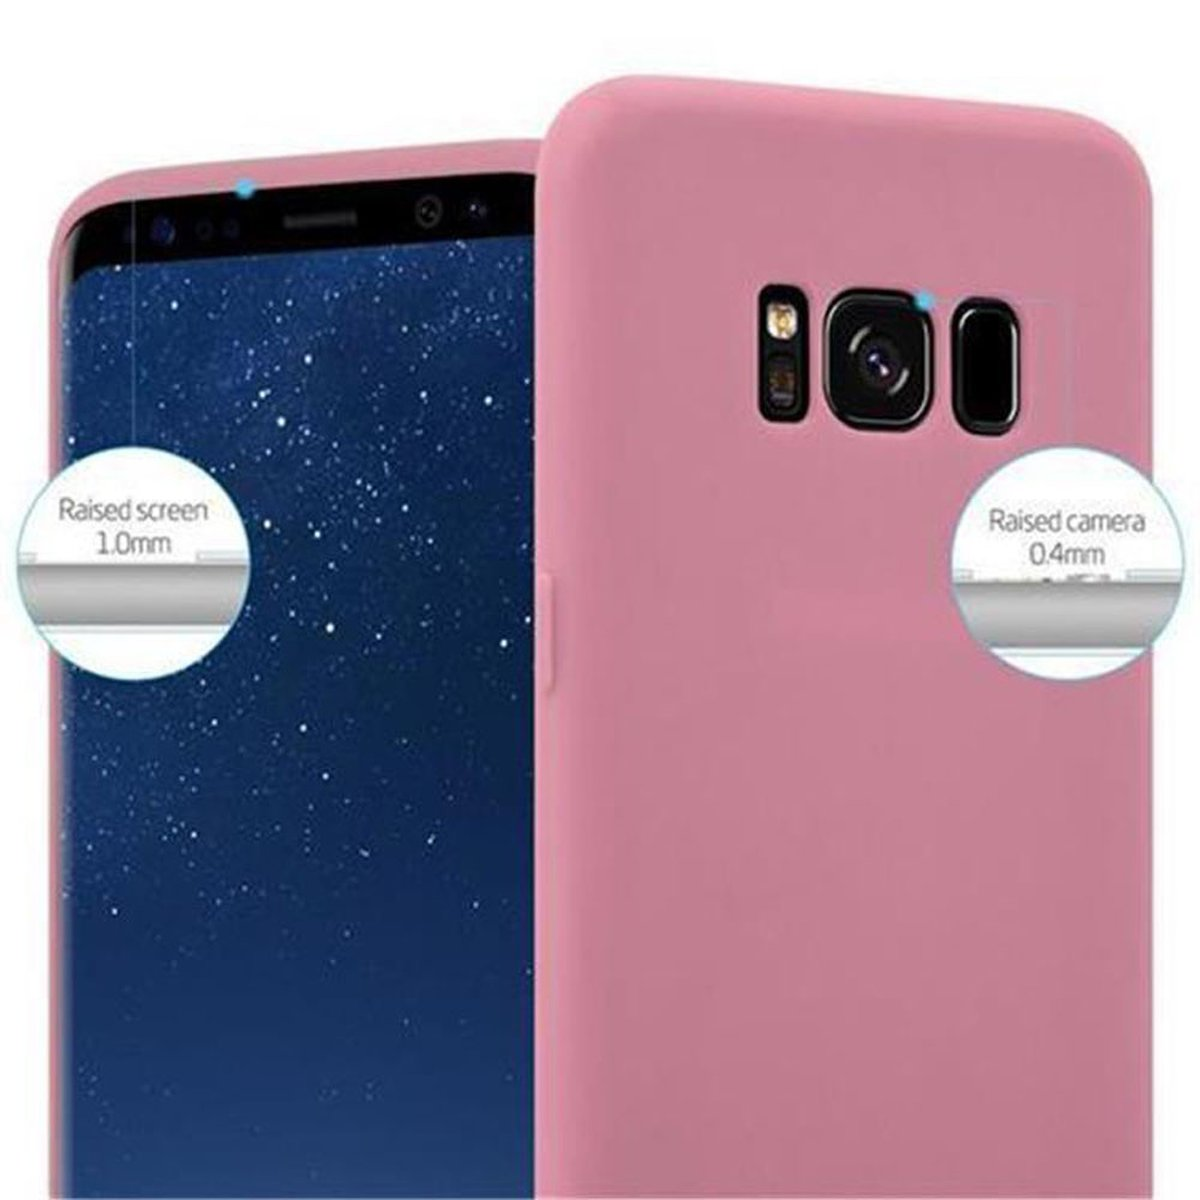 Style, Galaxy CANDY TPU S8 Candy ROSA Samsung, PLUS, im Hülle Backcover, CADORABO